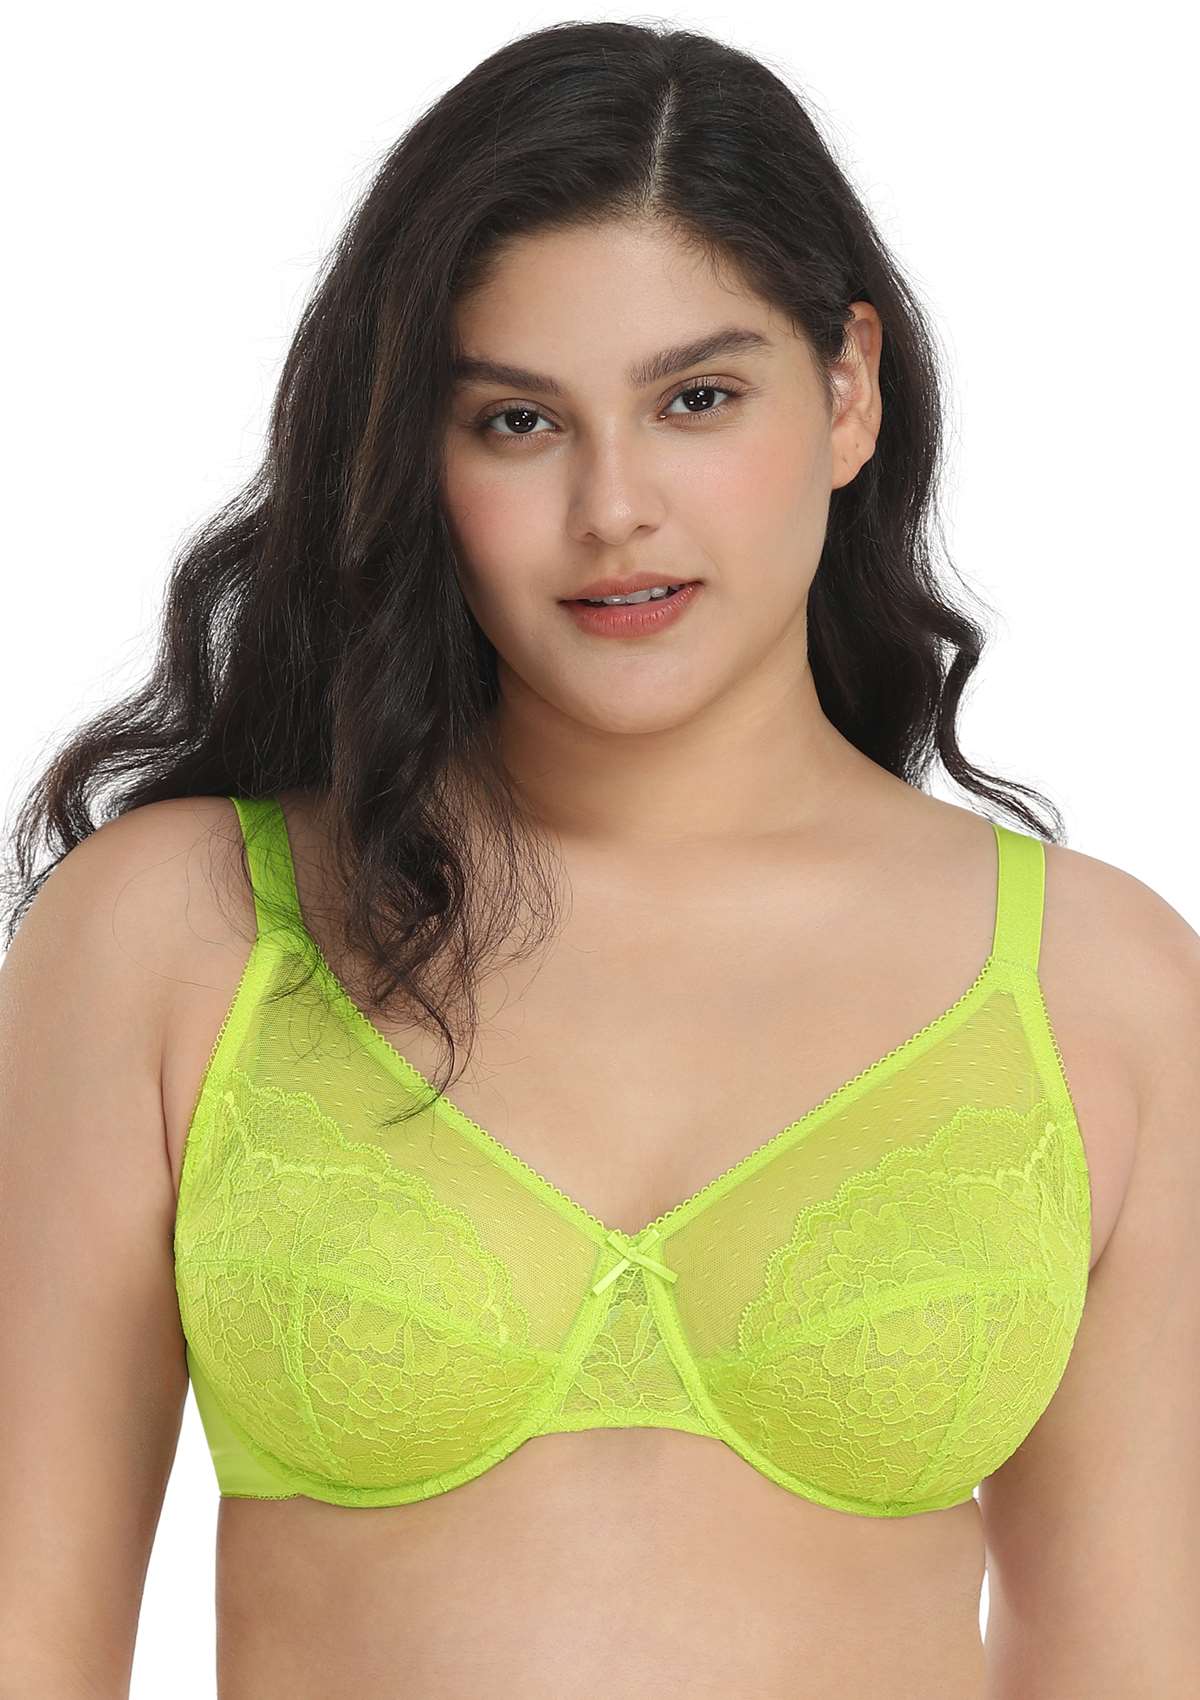 HSIA Enchante Full Cup Minimizing Bra: Supportive Unlined Lace Bra - Lime Green / 38 / C